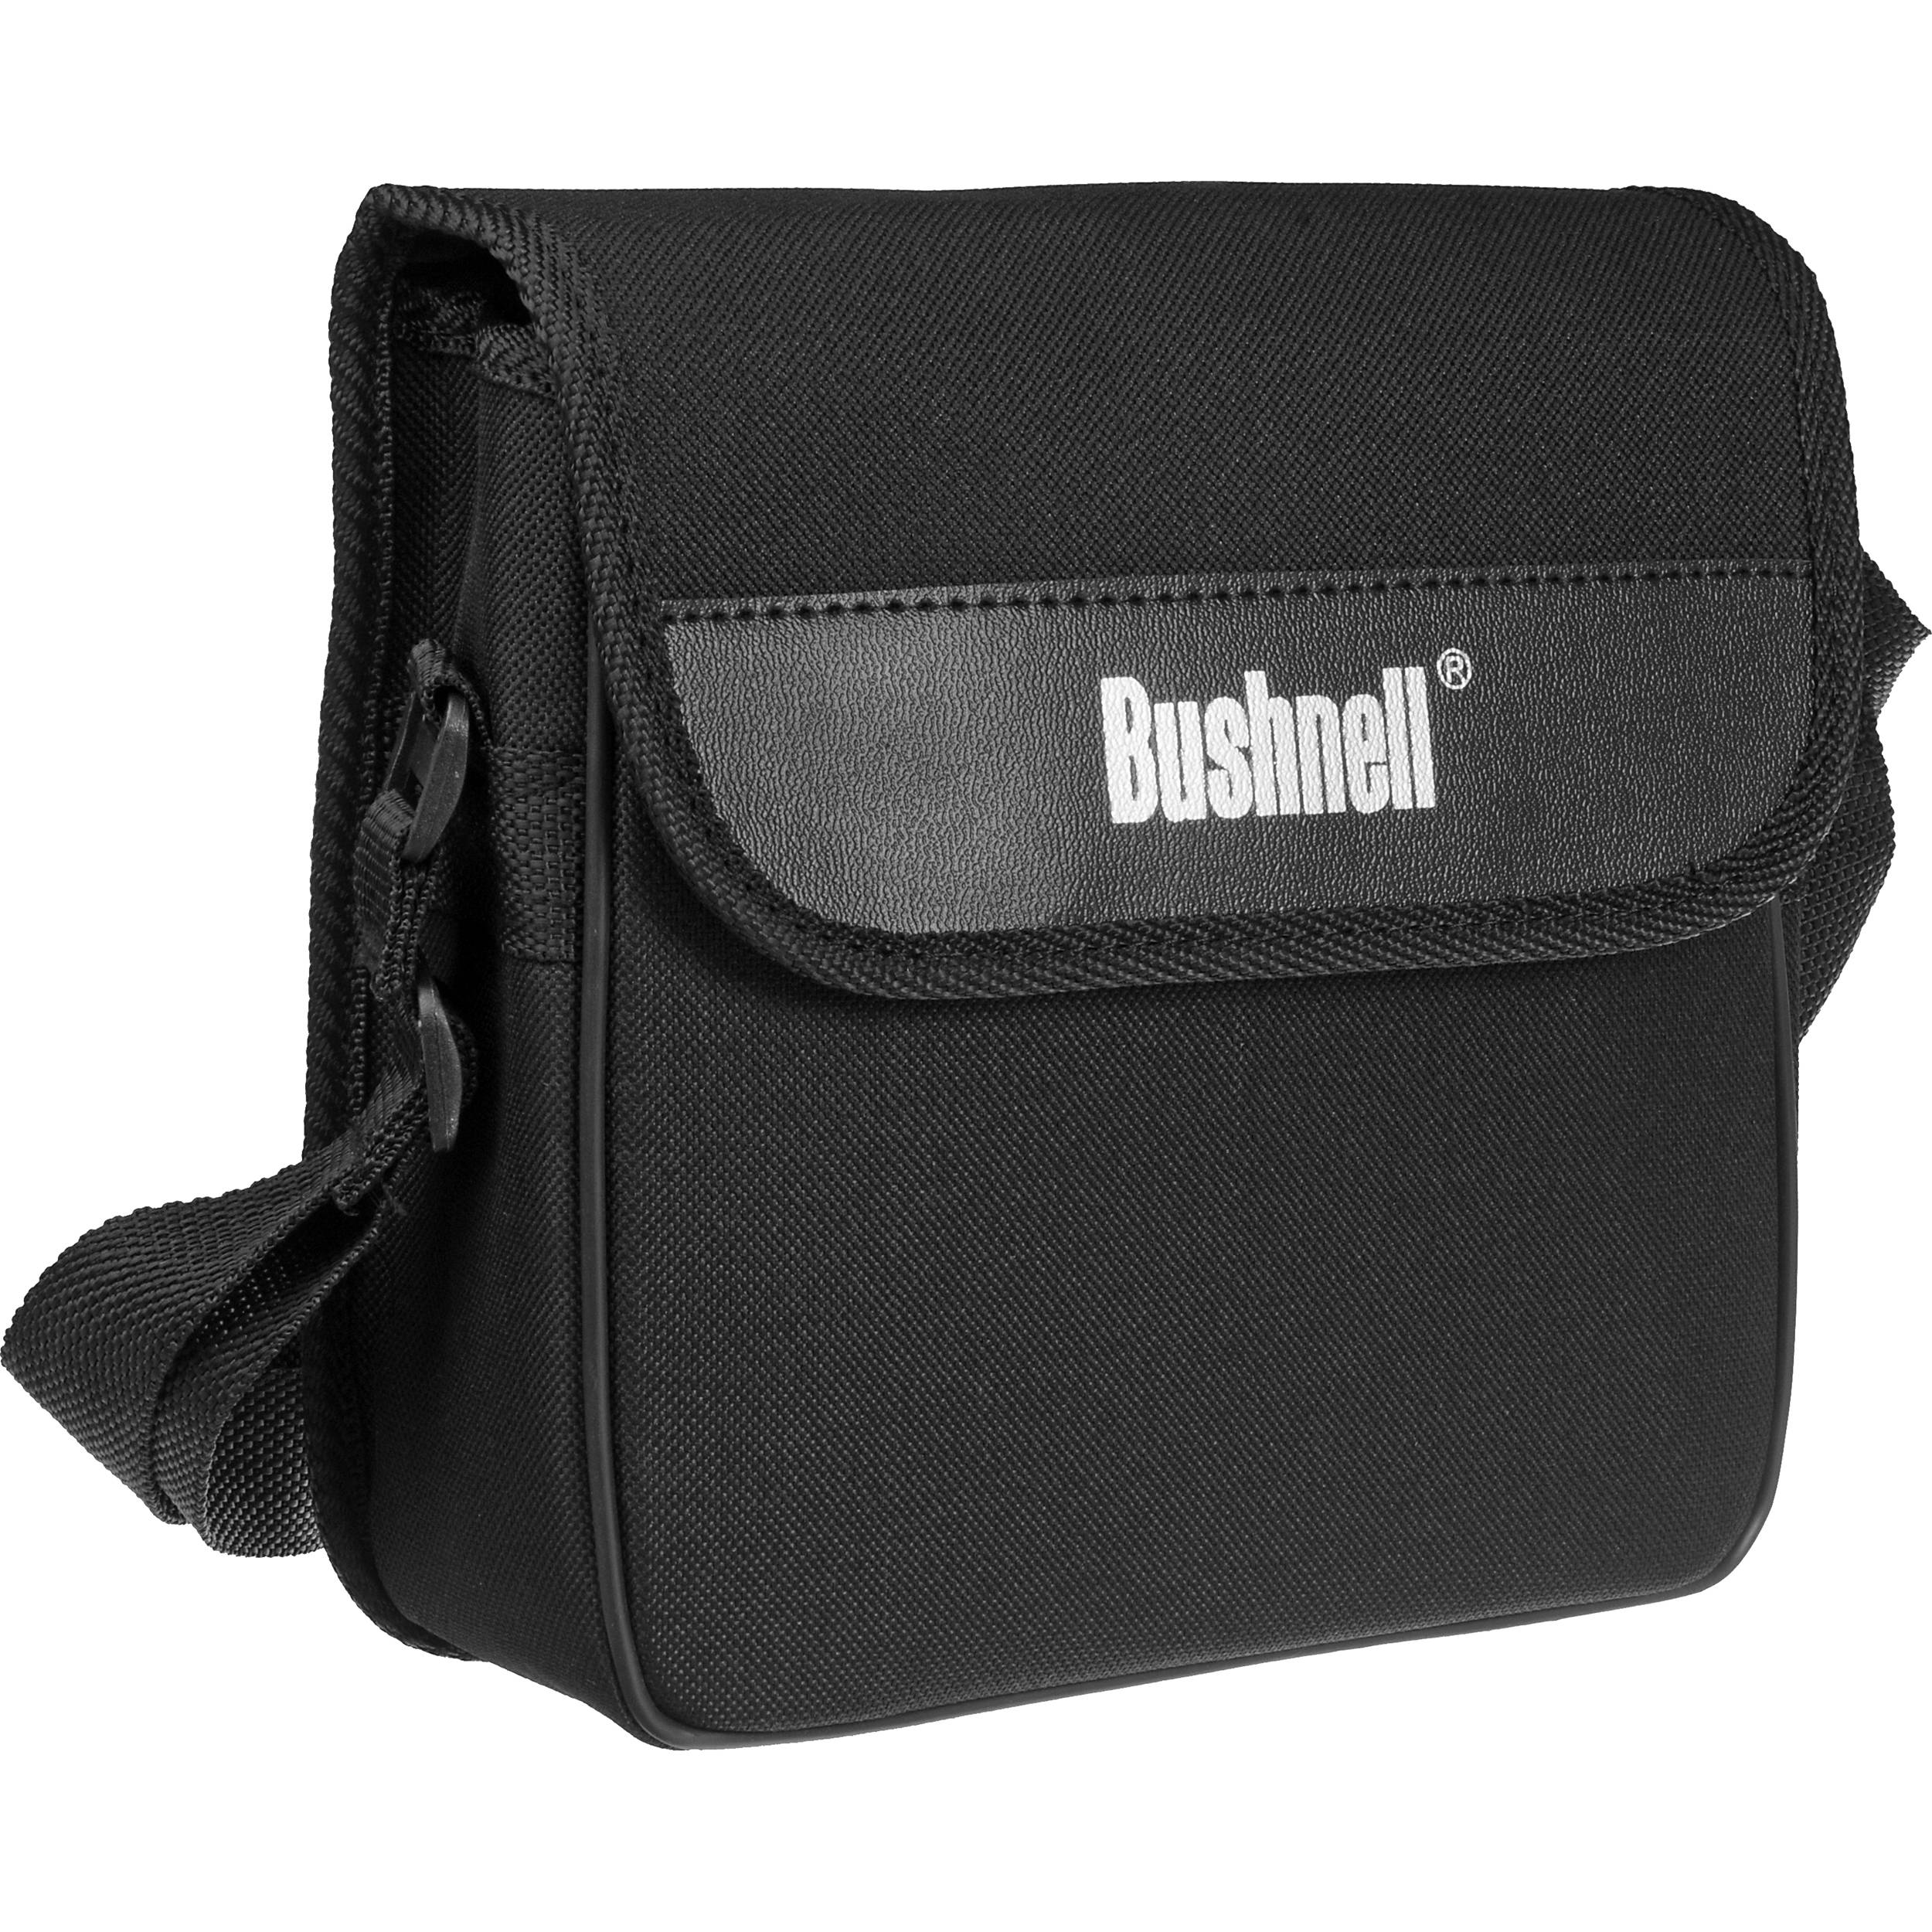 Bushnell H2O Series 7x50 Porro Prism Waterproof Binoculars - H2O Series -  Binoculars - Bushnell - Brands - Optics Central